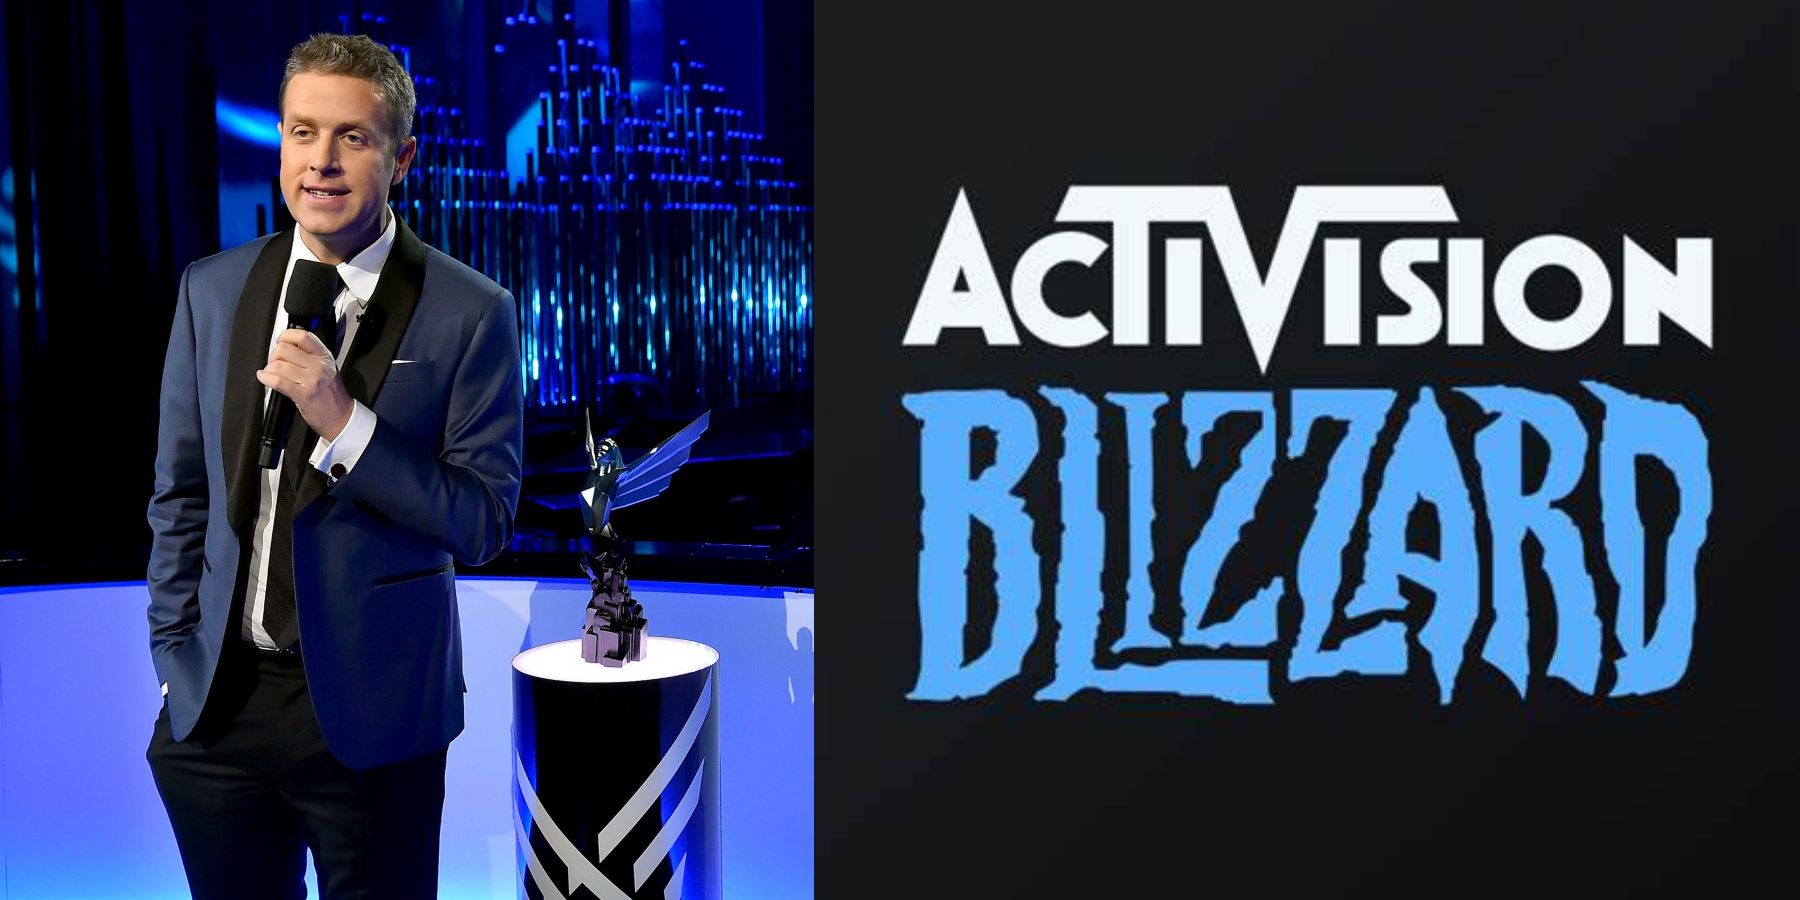 The Game Awards' Activision Controversy Explained